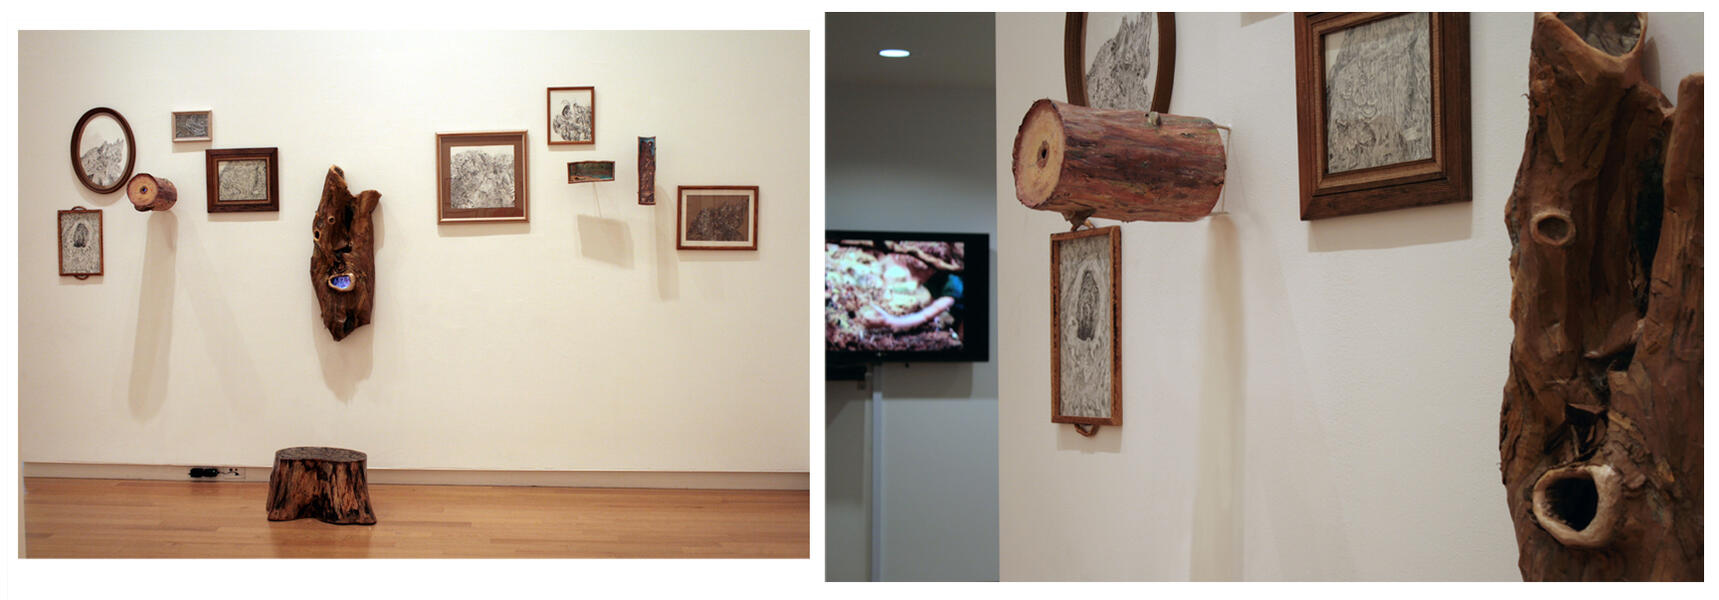 installation at Goucher College (two installation perspectives)